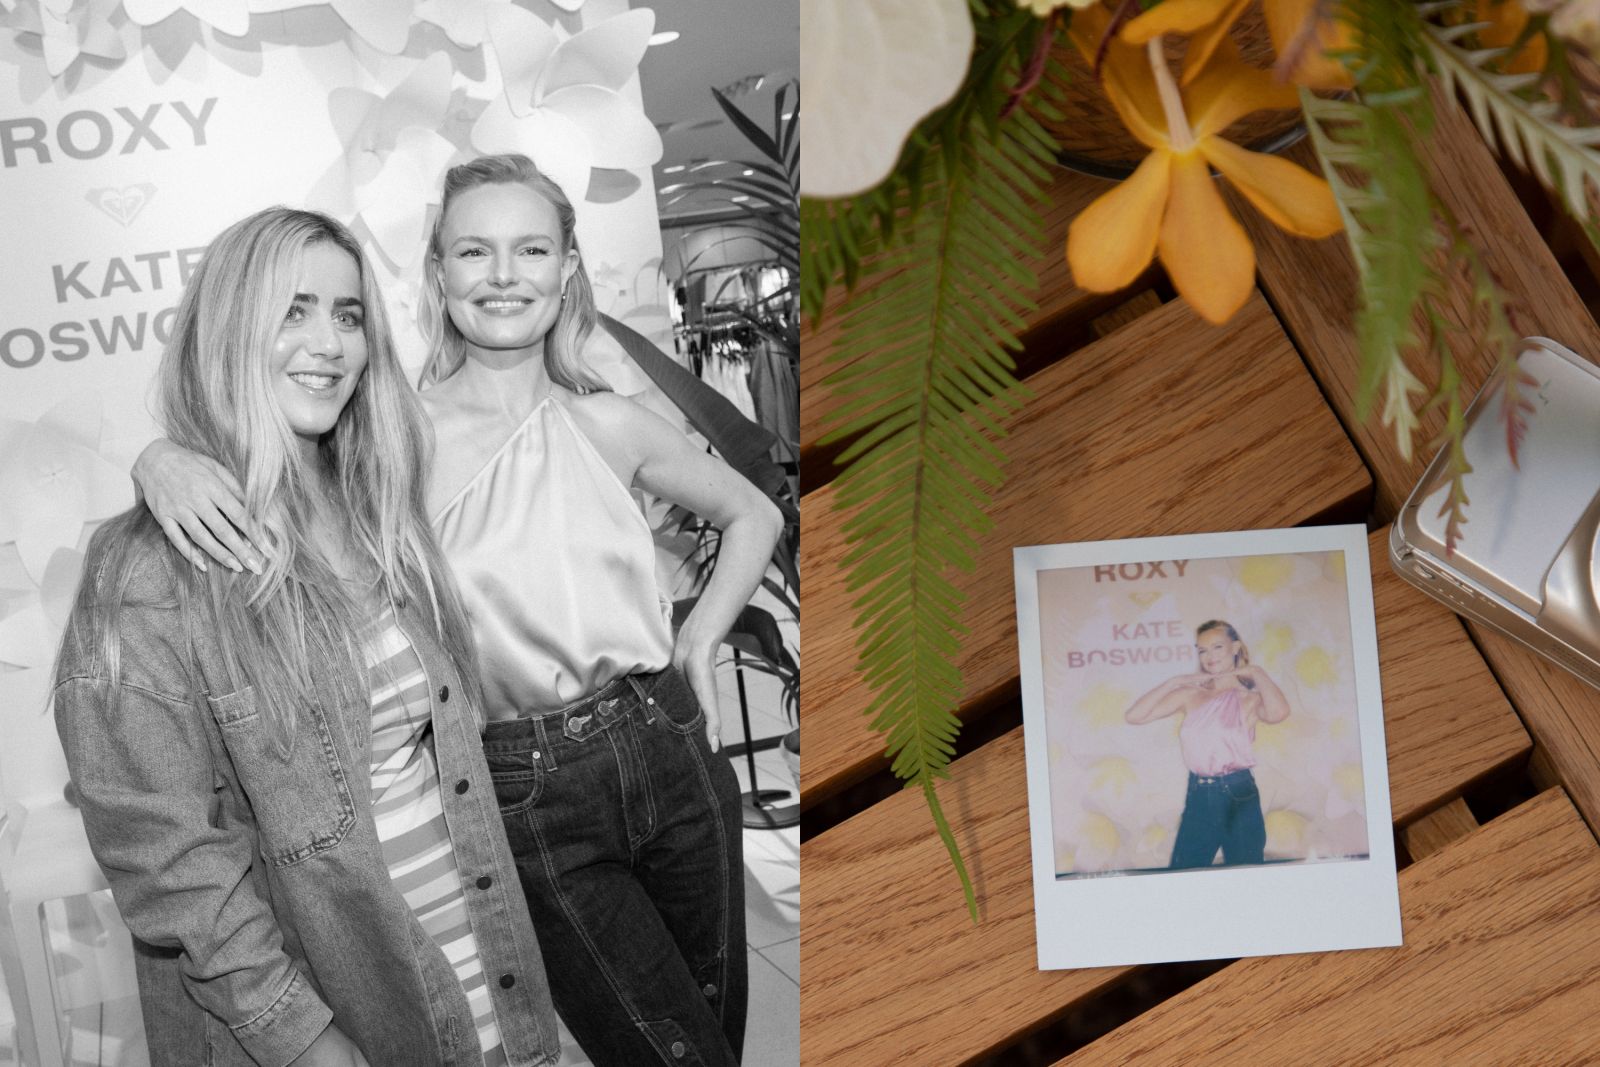 ROXY x Kate Bosworth Q&A Panel at Nordstrom